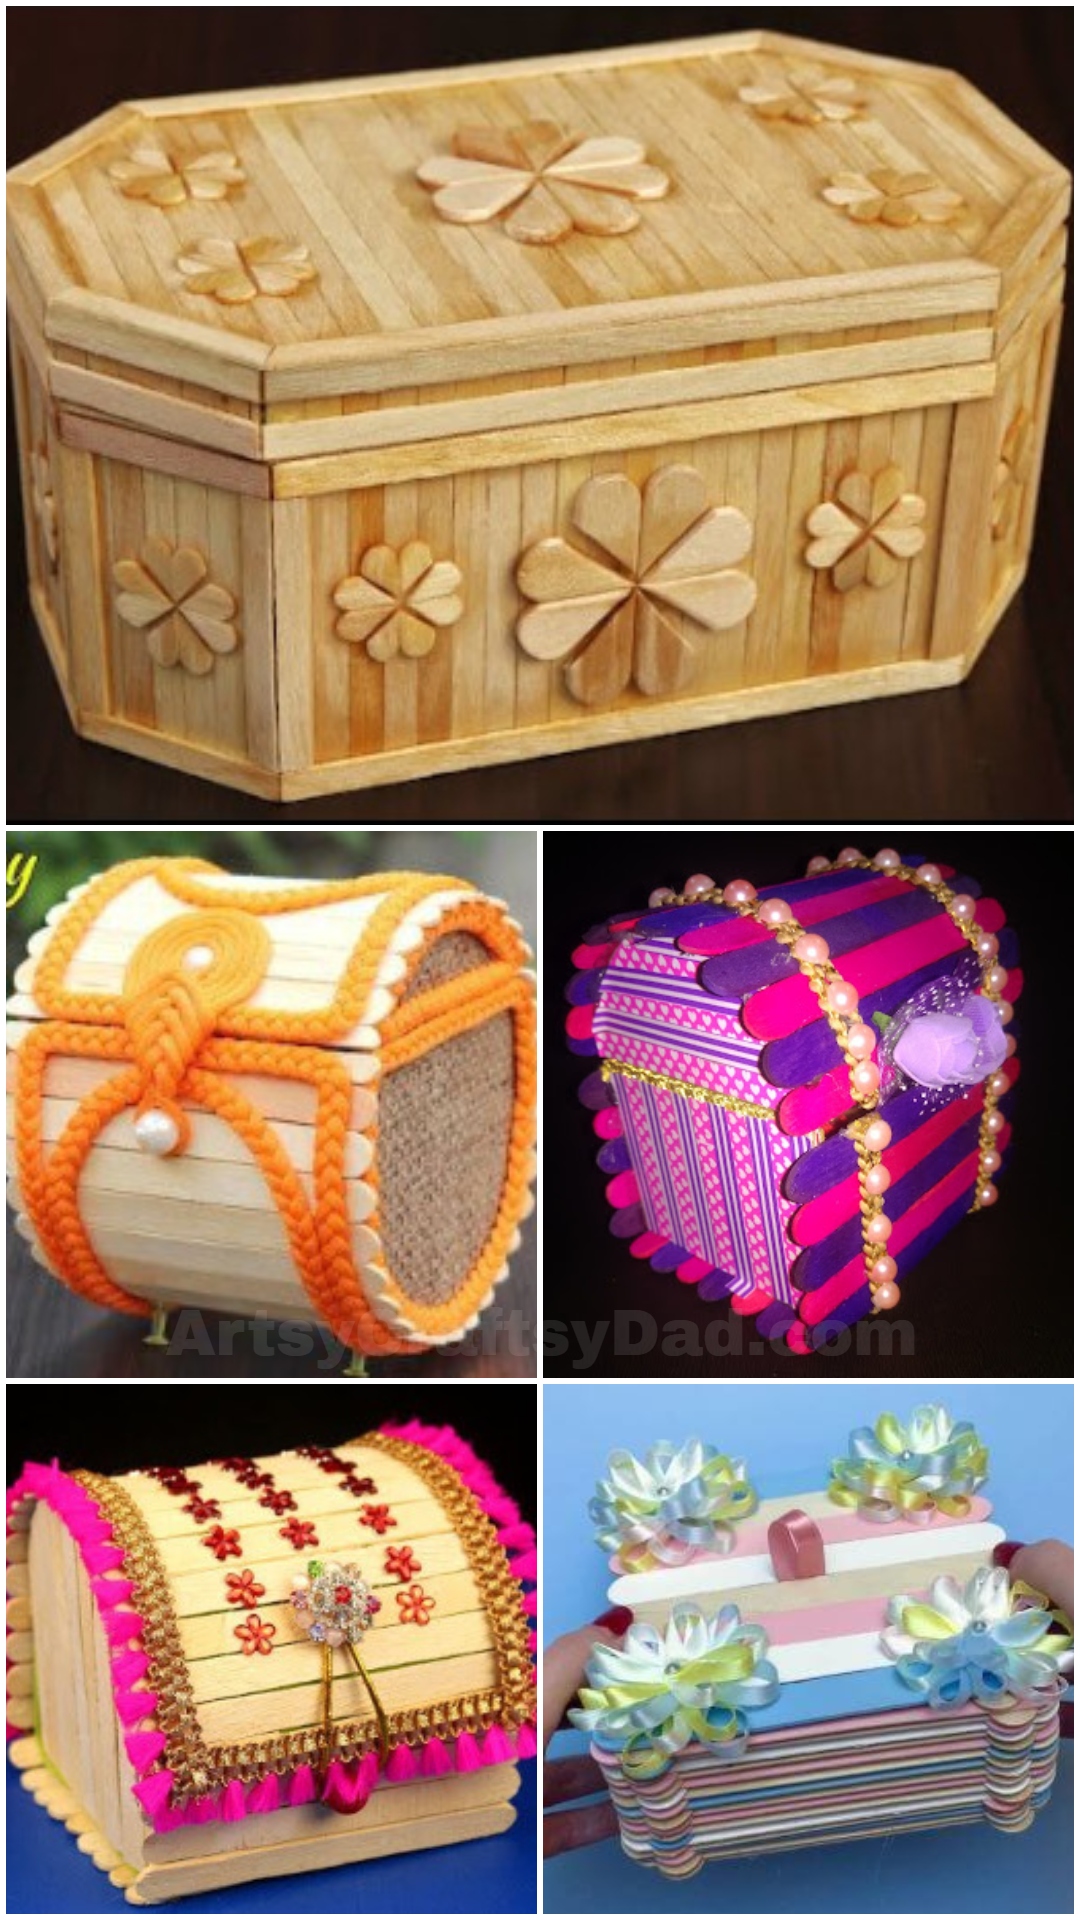 DIY Jewelry Box made from Popsicle Sticks